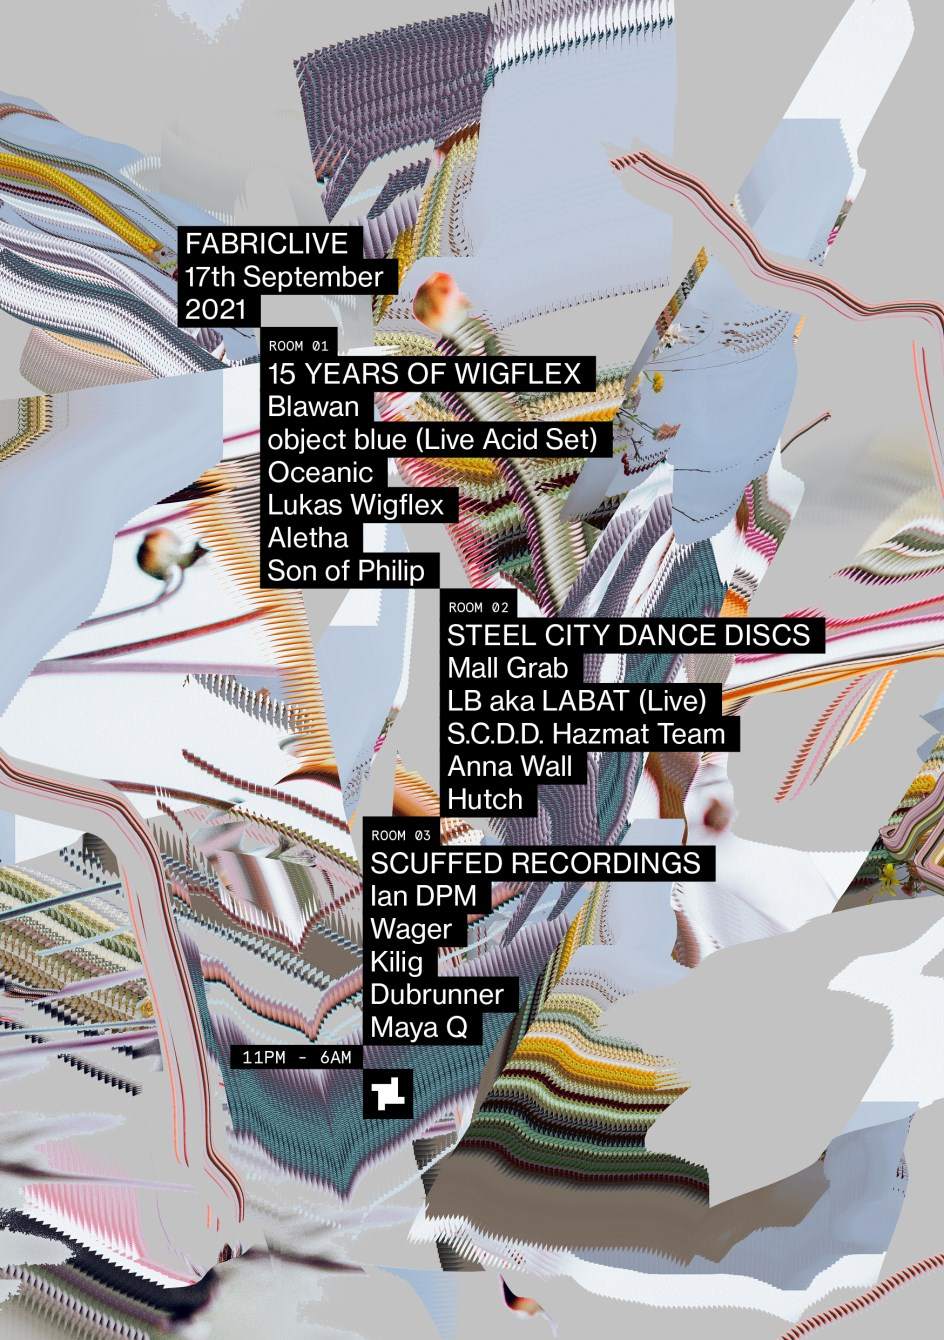 FABRICLIVE: 15 Years of Wigflex, Mall Grab, object blue, Scuffed Recordings & More - Página frontal